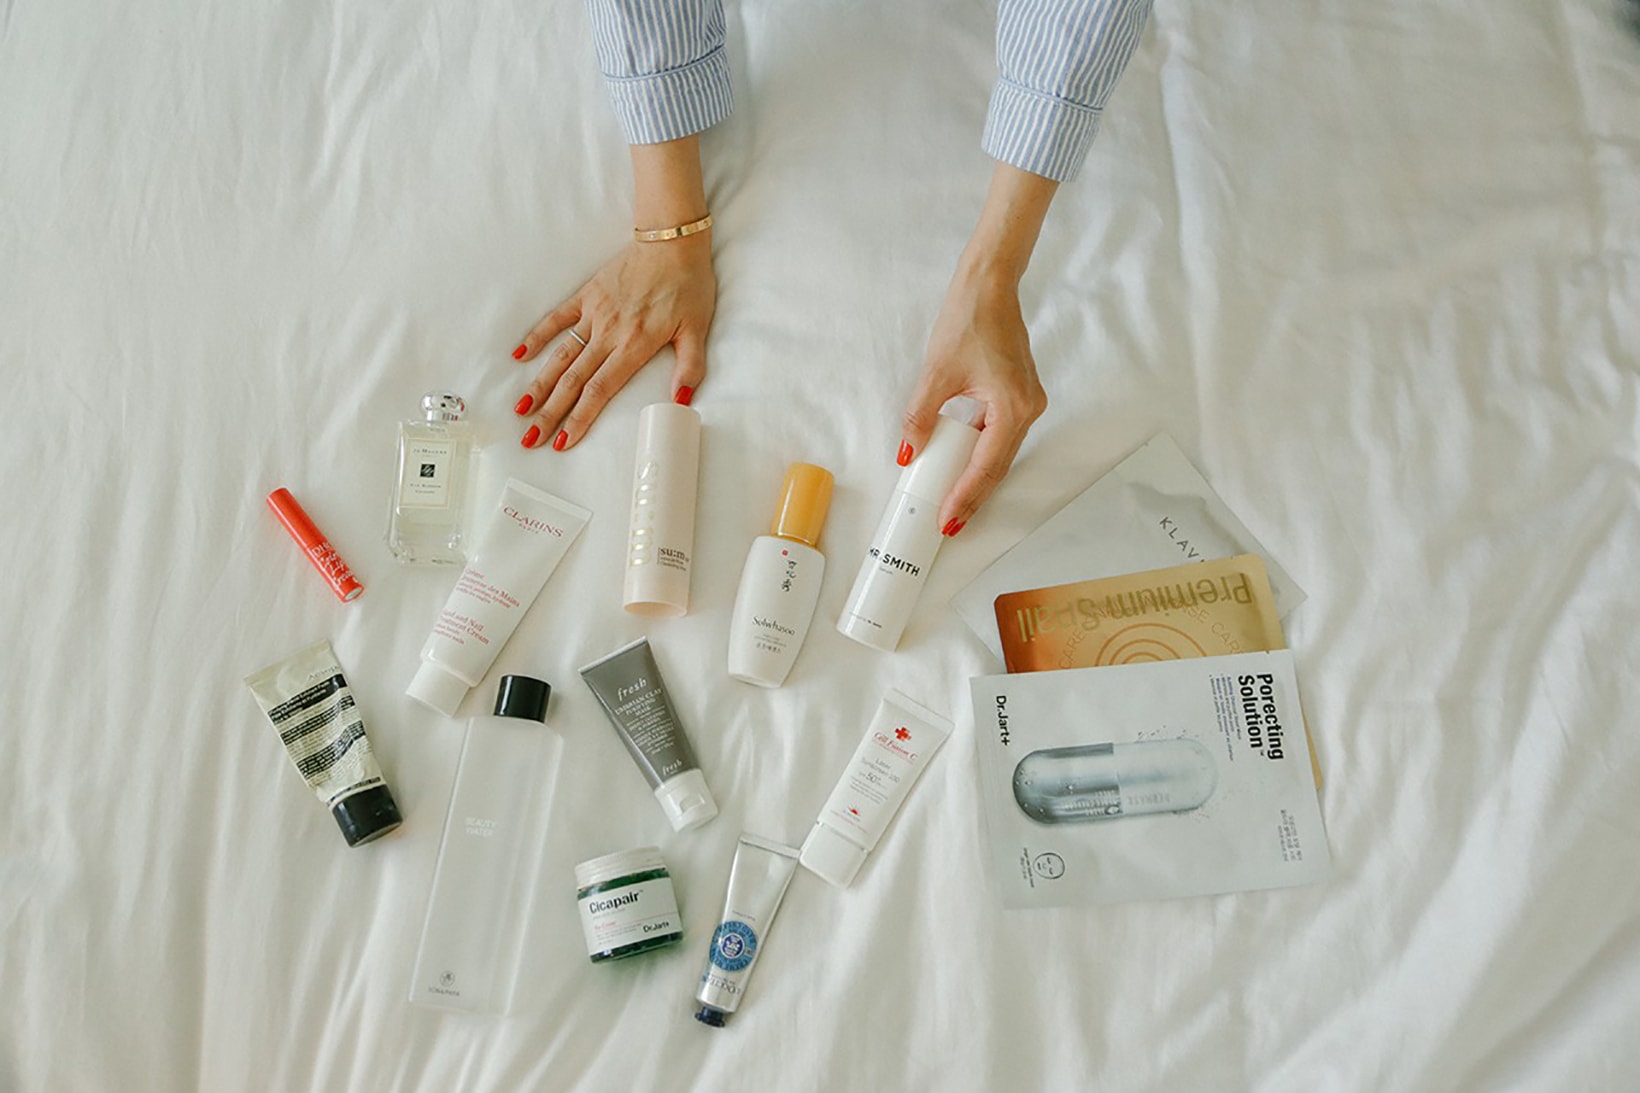 Skincare Beauty Products Red Nails Sulwhasoo Face Masks Sheet Dr Jart Aesop Cream Jo Malone Fragrance Perfume Lip Balm Hand Fresh Hair Chanel Serum Toner Bed Home